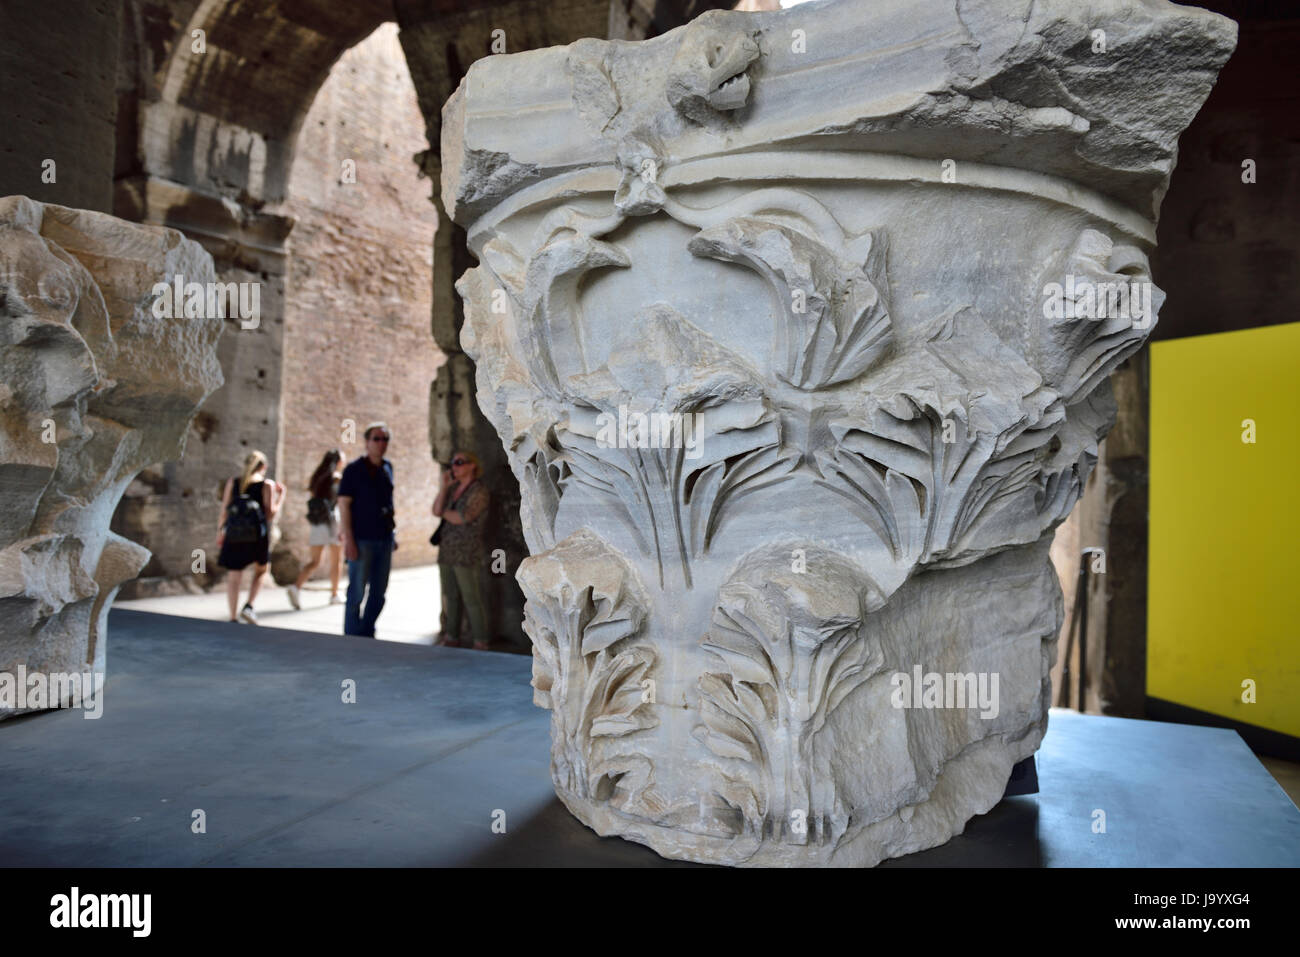 stone capital from the top of a column in display area of the Roman Colosseum, Rome, Italy Stock Photo